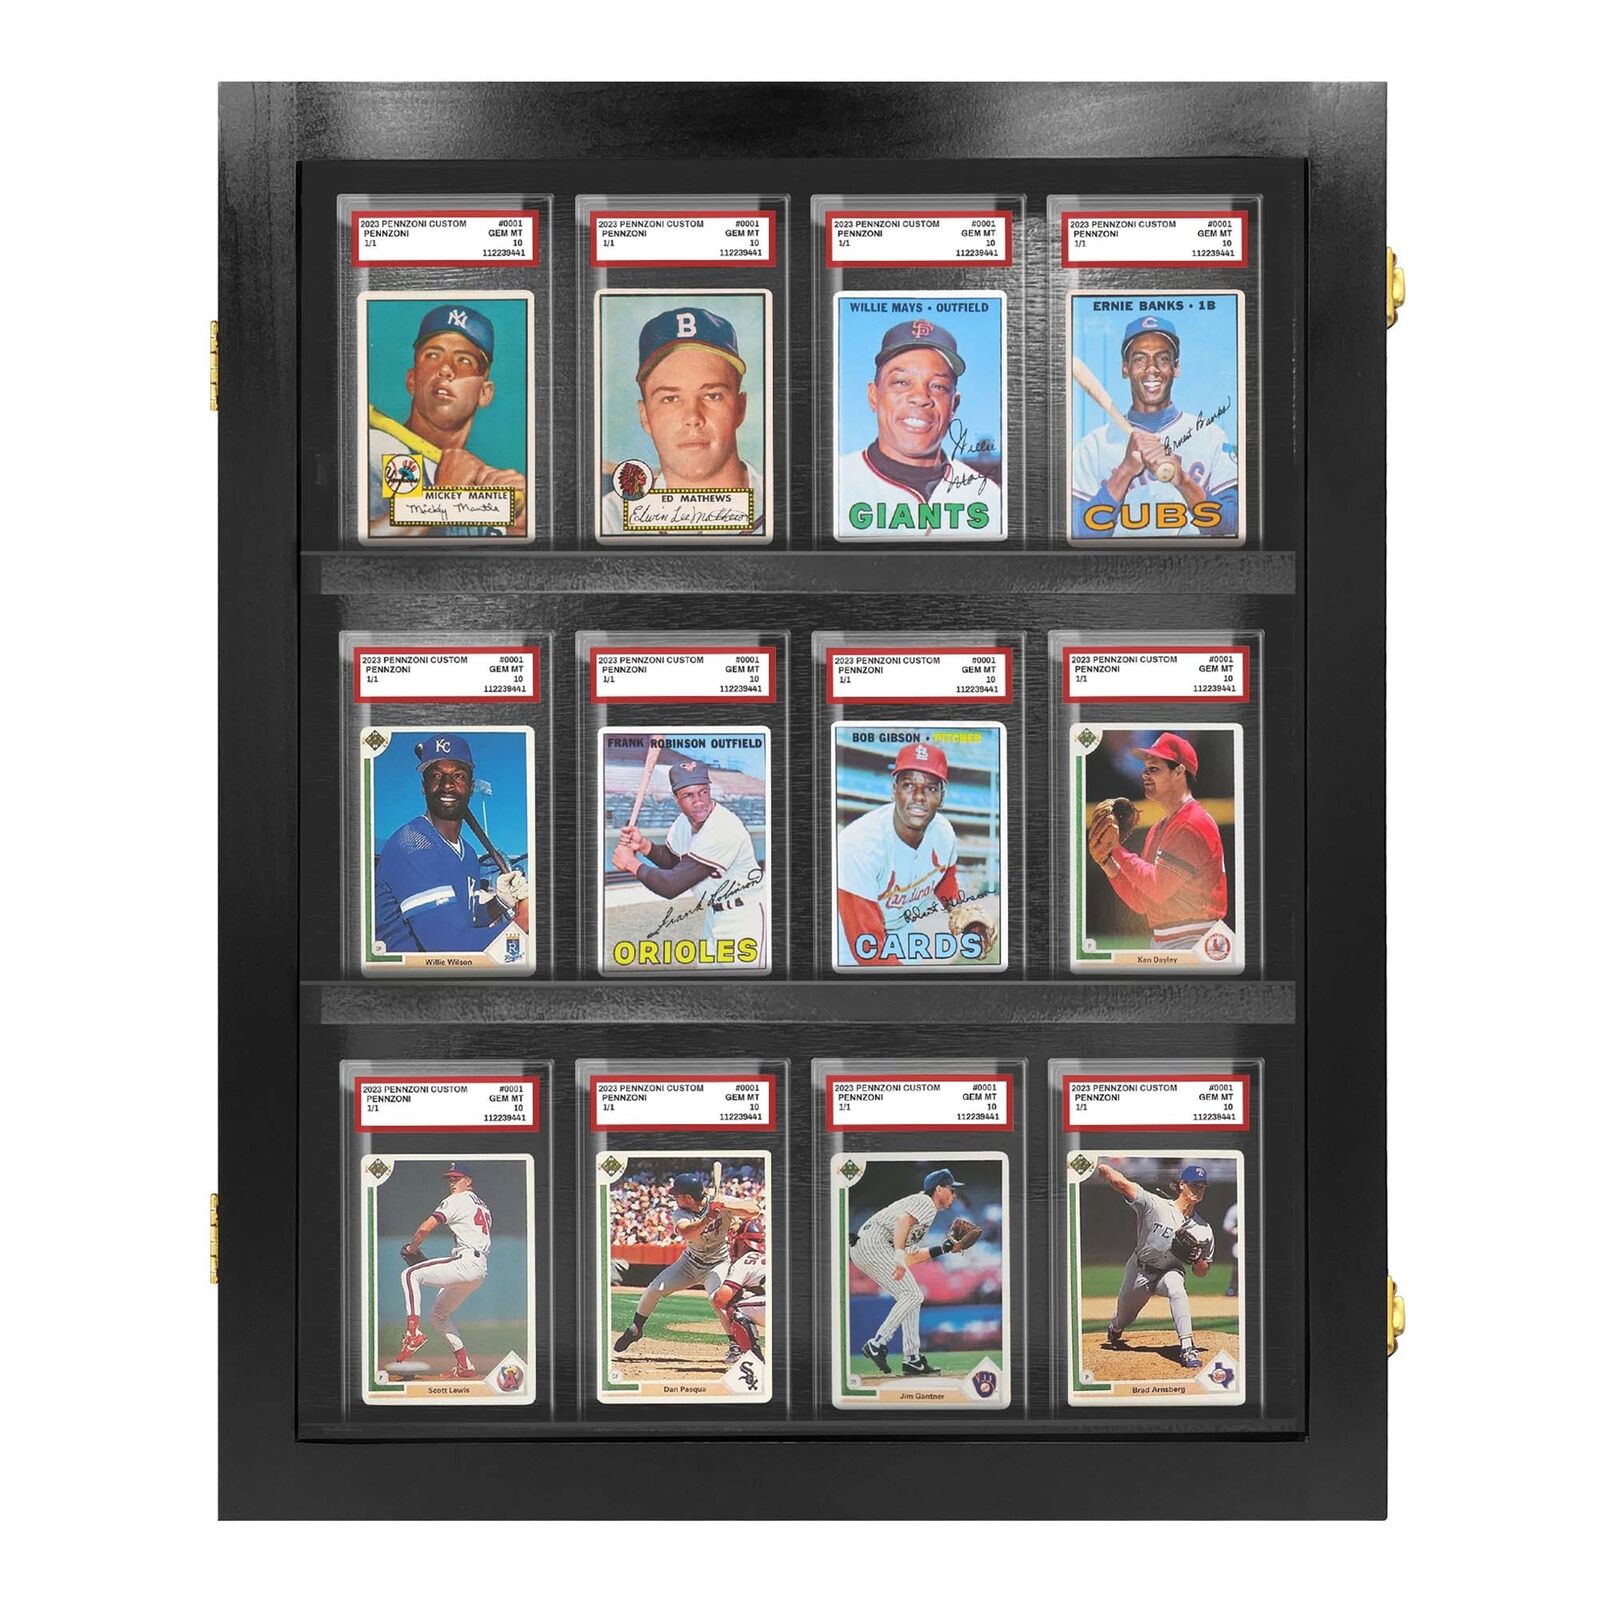 PENNZONI Sports Card Display Case, Holds 12 PSA Graded Sports Cards